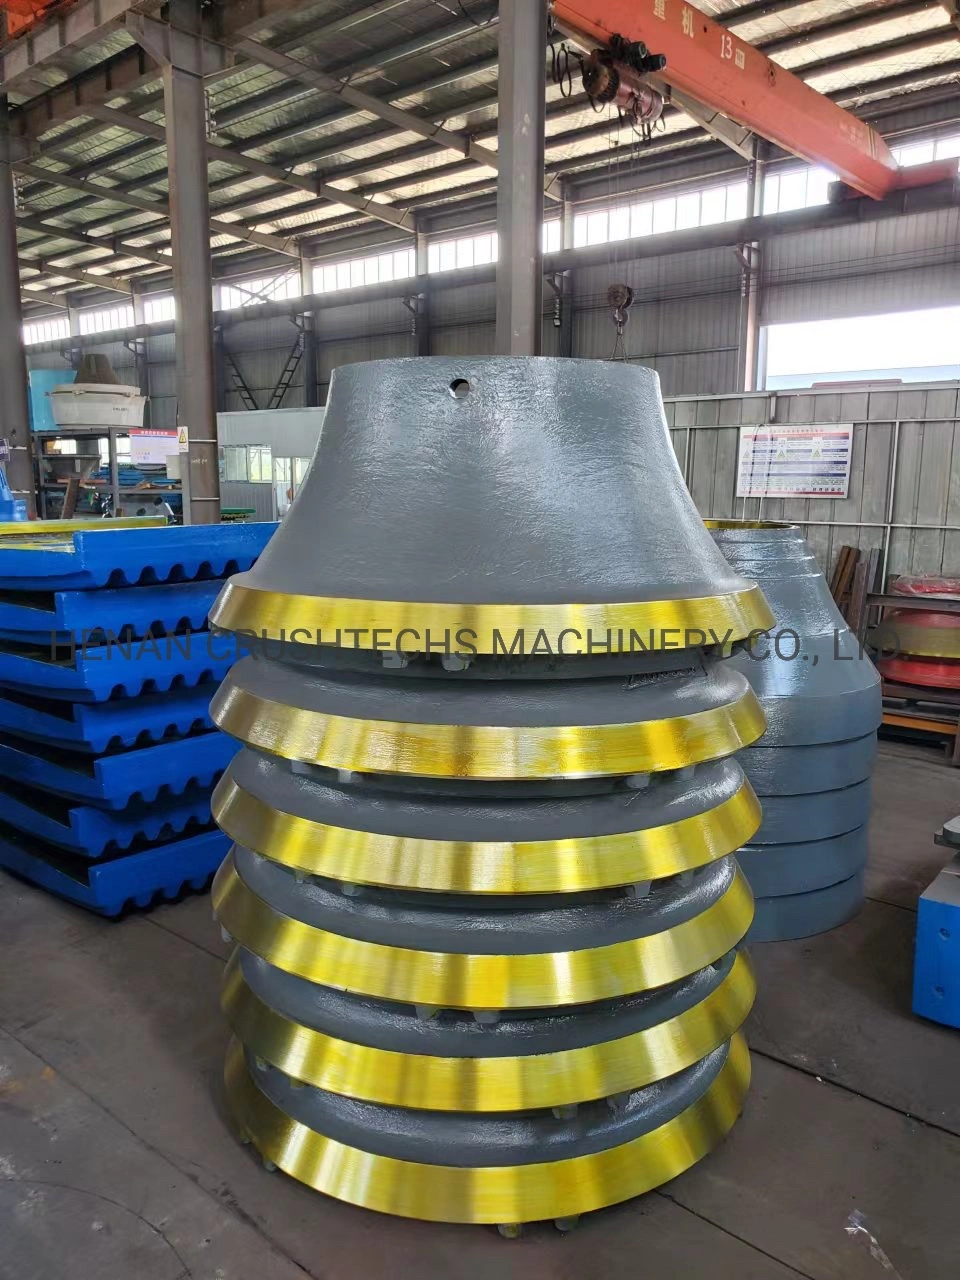 Symons 4.25" Standard Cone Crusher Mantle and Bowl Liners